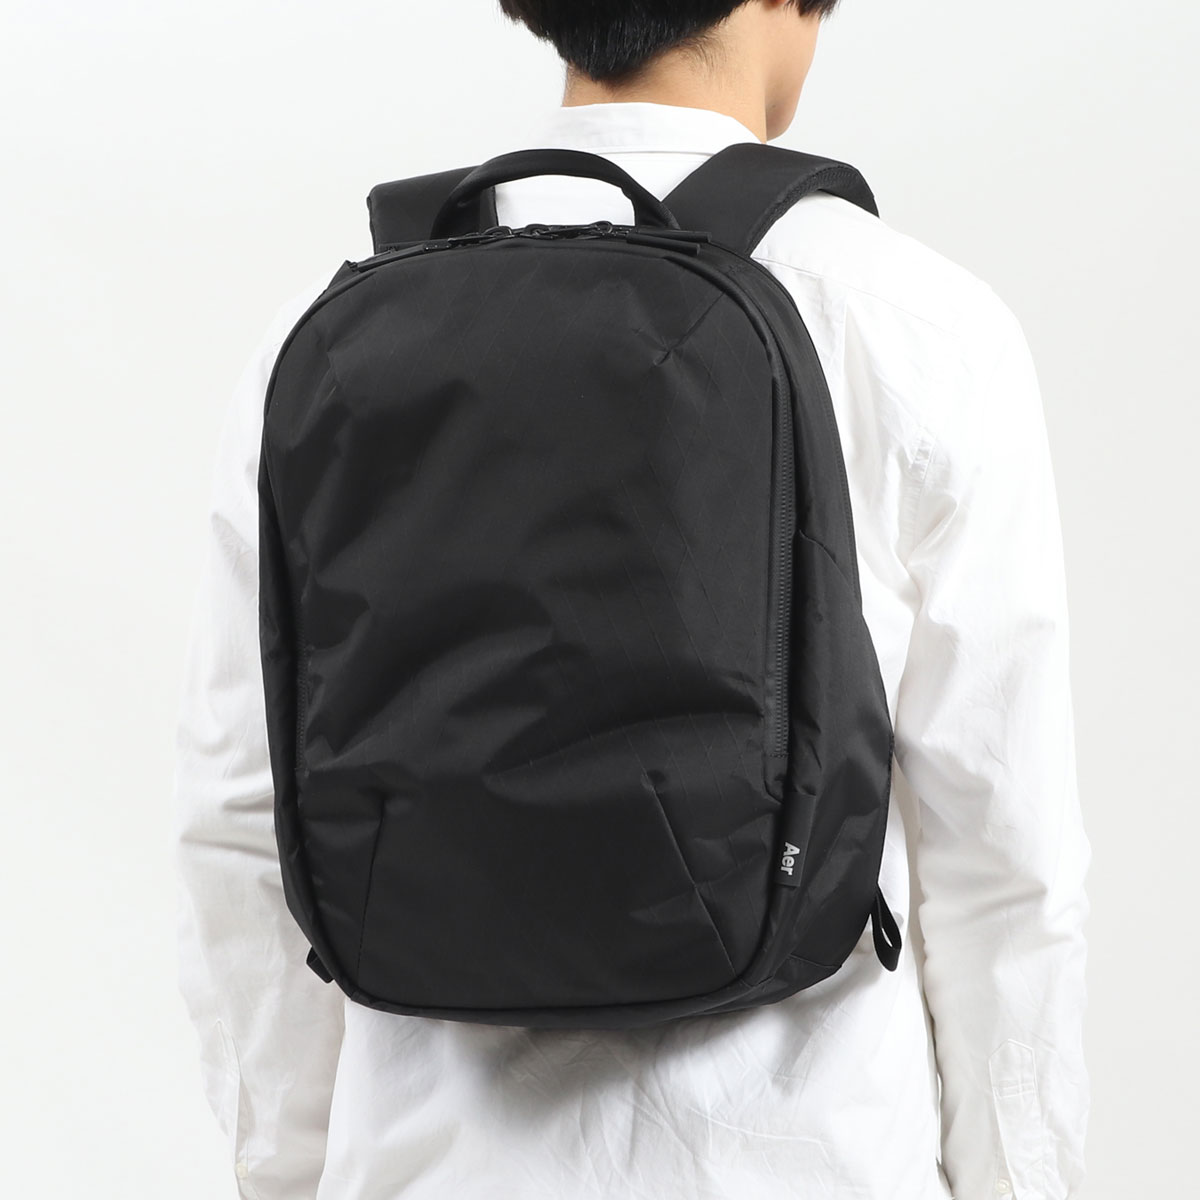 AER Day Pack 2 X-PAC素材